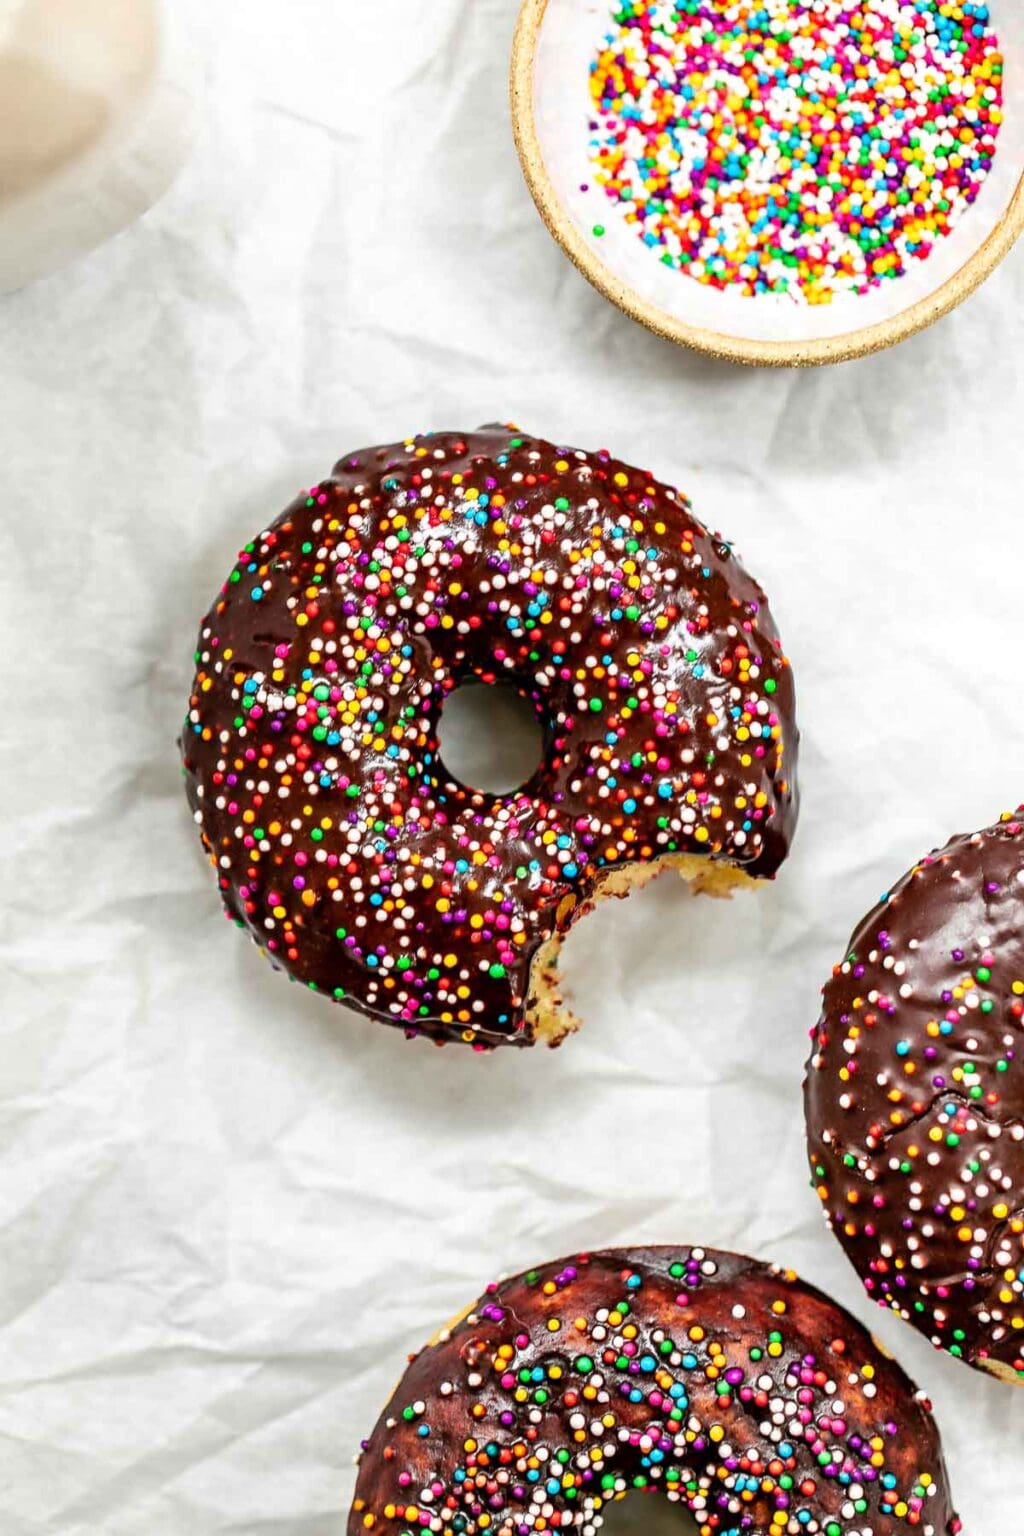 Baked Gluten Free Donuts | Eat With Clarity